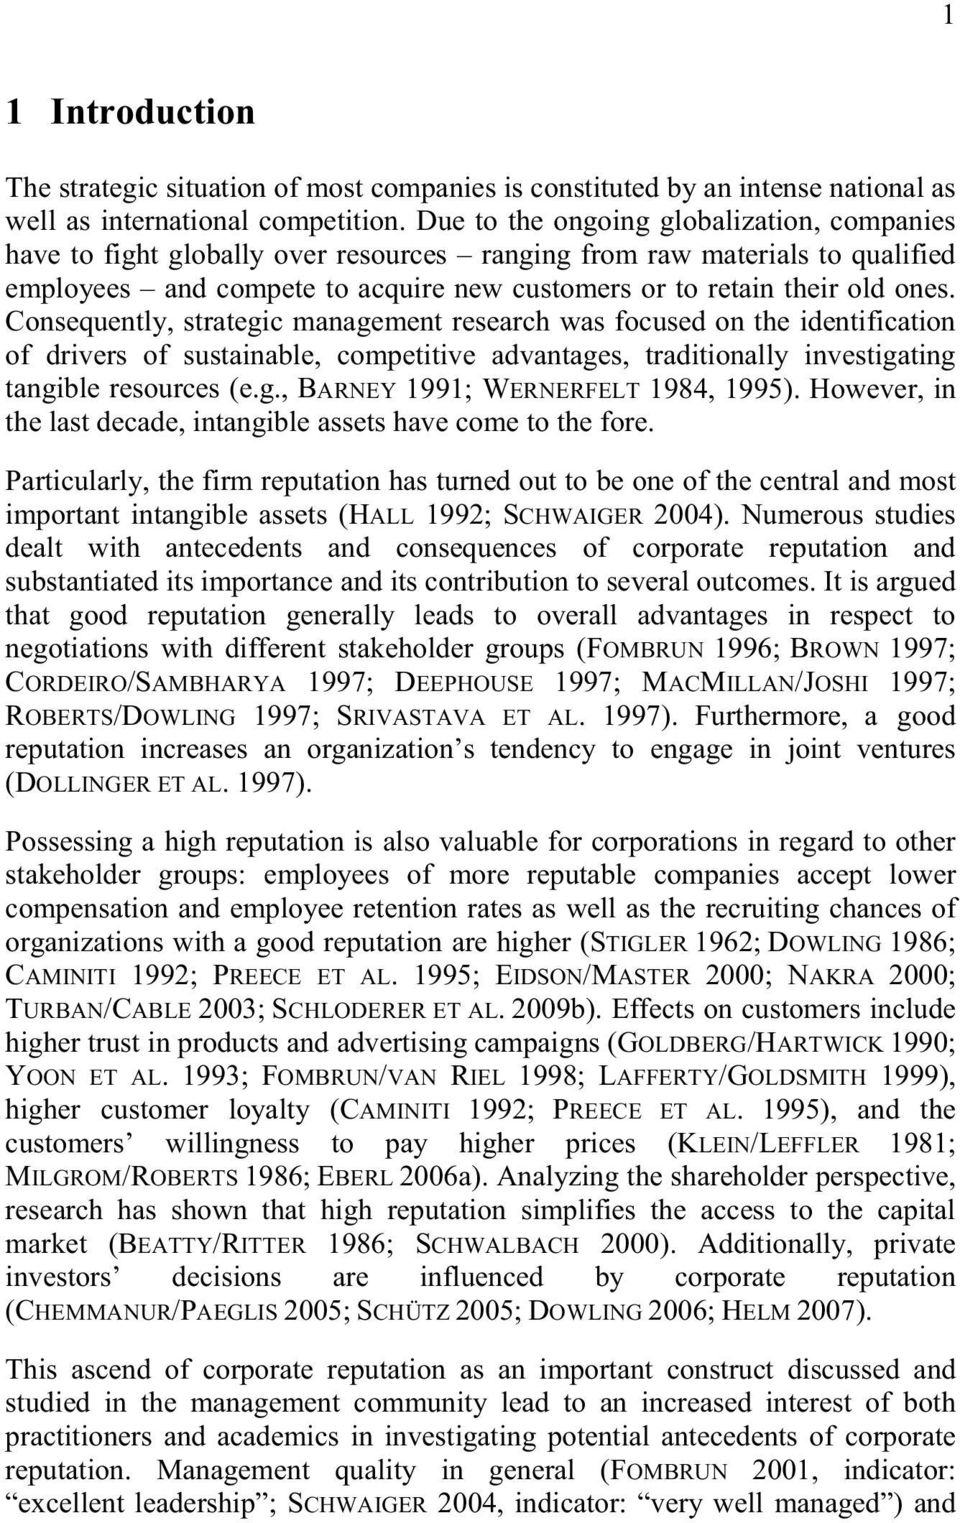 Consequently, strategic management research was focused on the identification of drivers of sustainable, competitive advantages, traditionally investigating tangible resources (e.g., BARNEY 1991; WERNERFELT 1984, 1995).